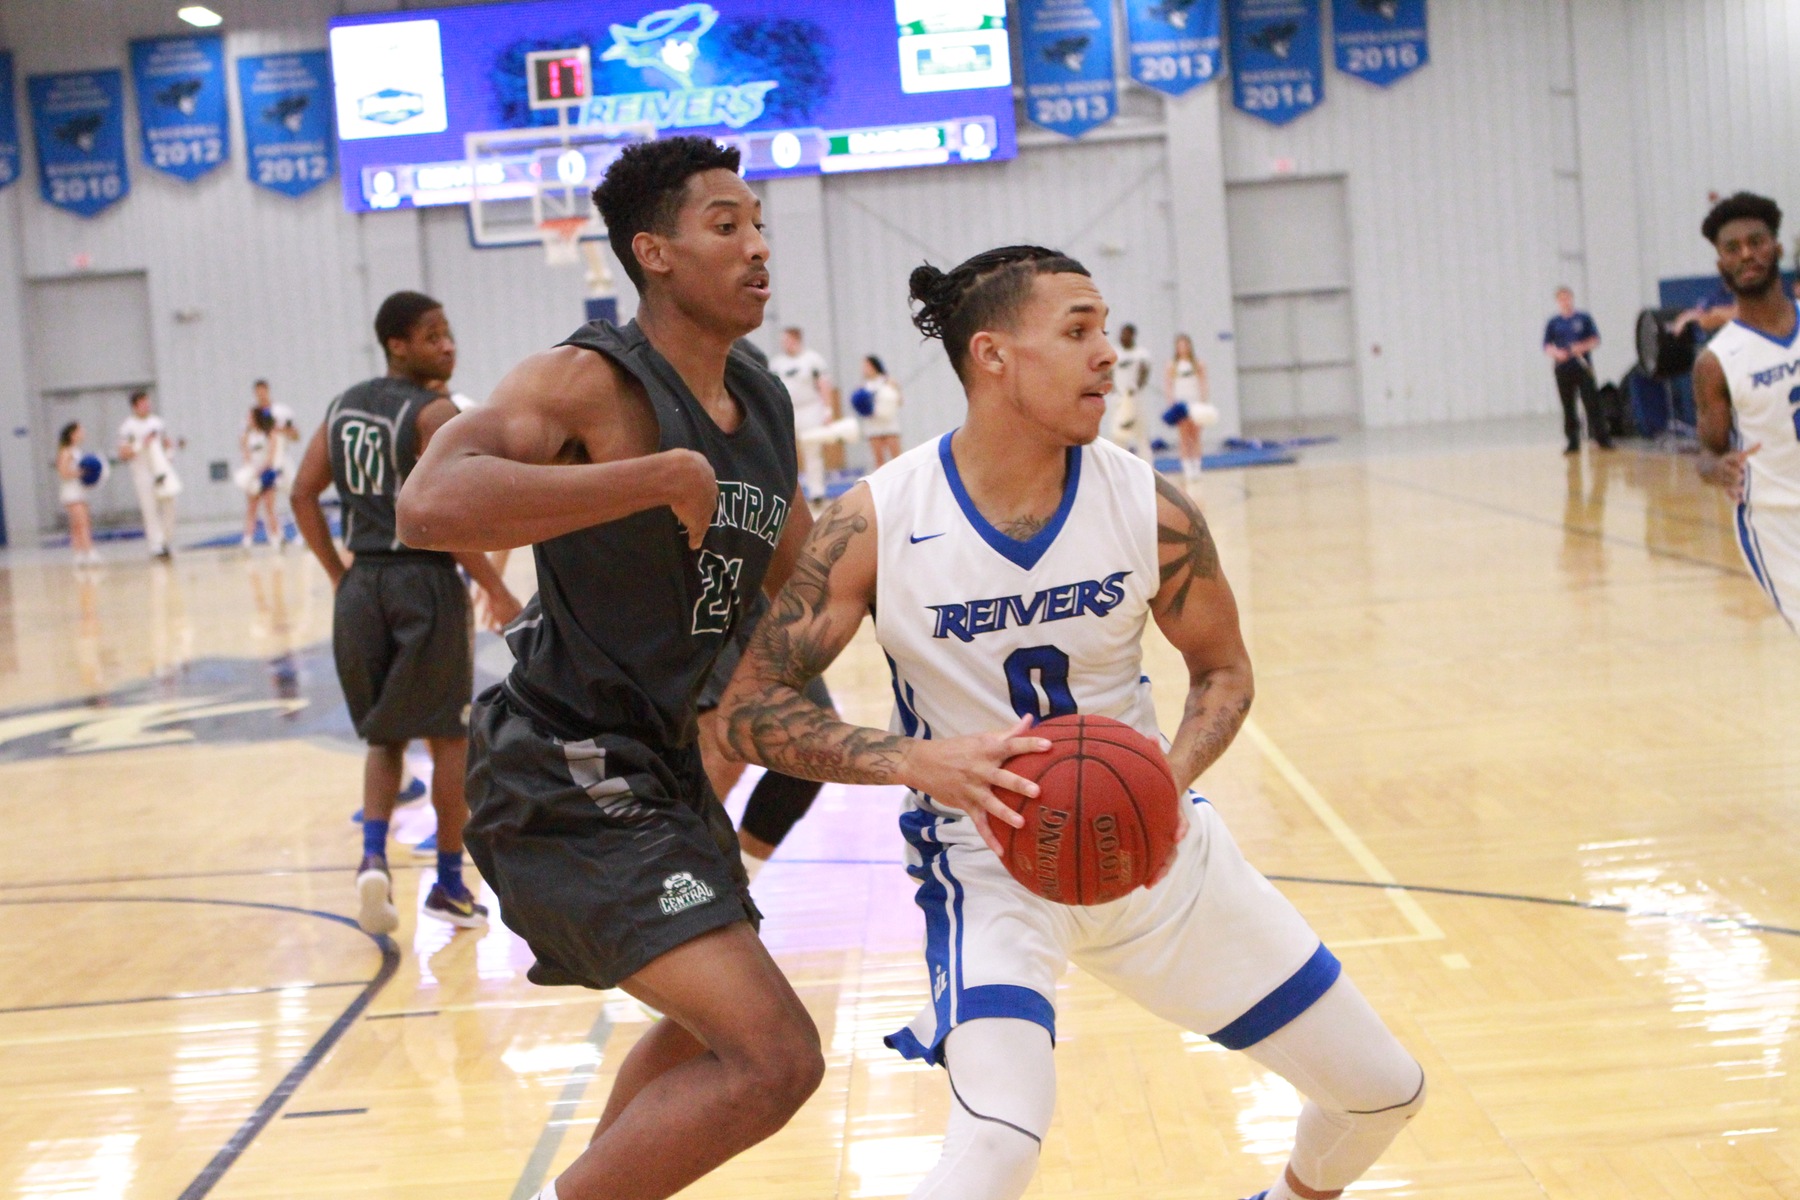 #21 Iowa Western's Isaiah Wade collected team highs in points (23) and rebounds (7) in the Reivers conference opener win over Marshalltown 87-74.